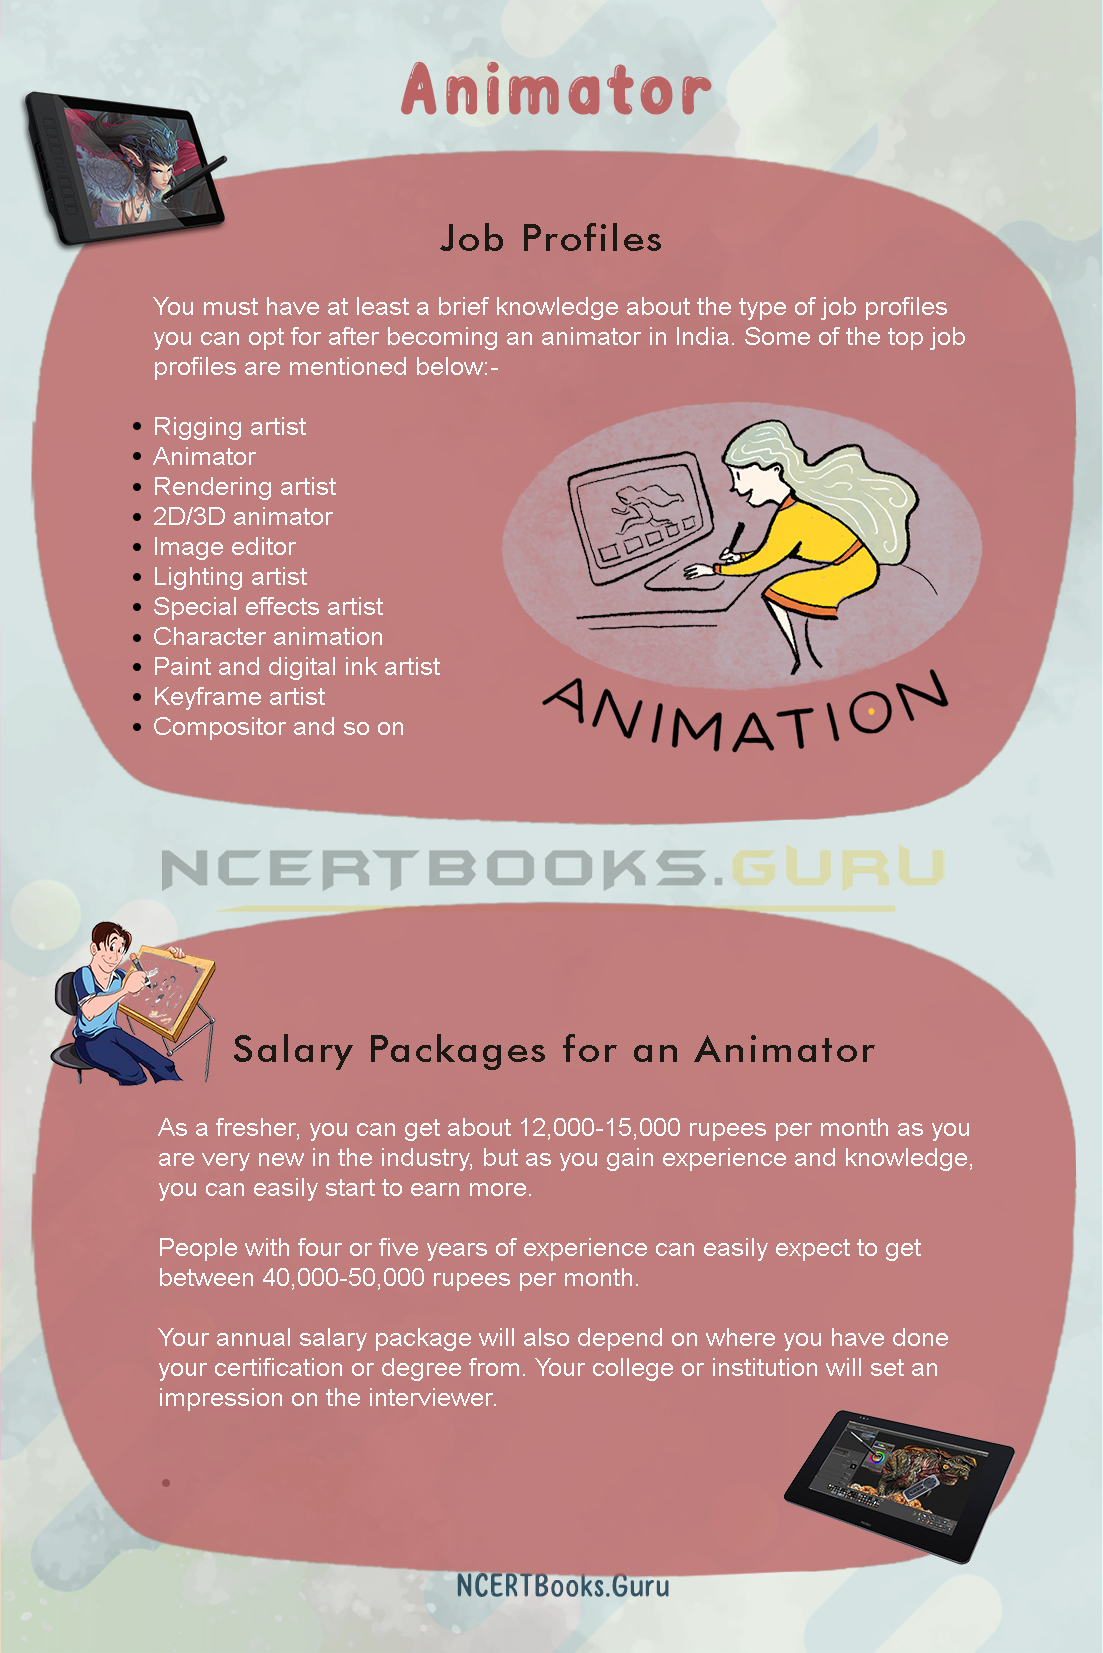 How to become an Animator in India 2